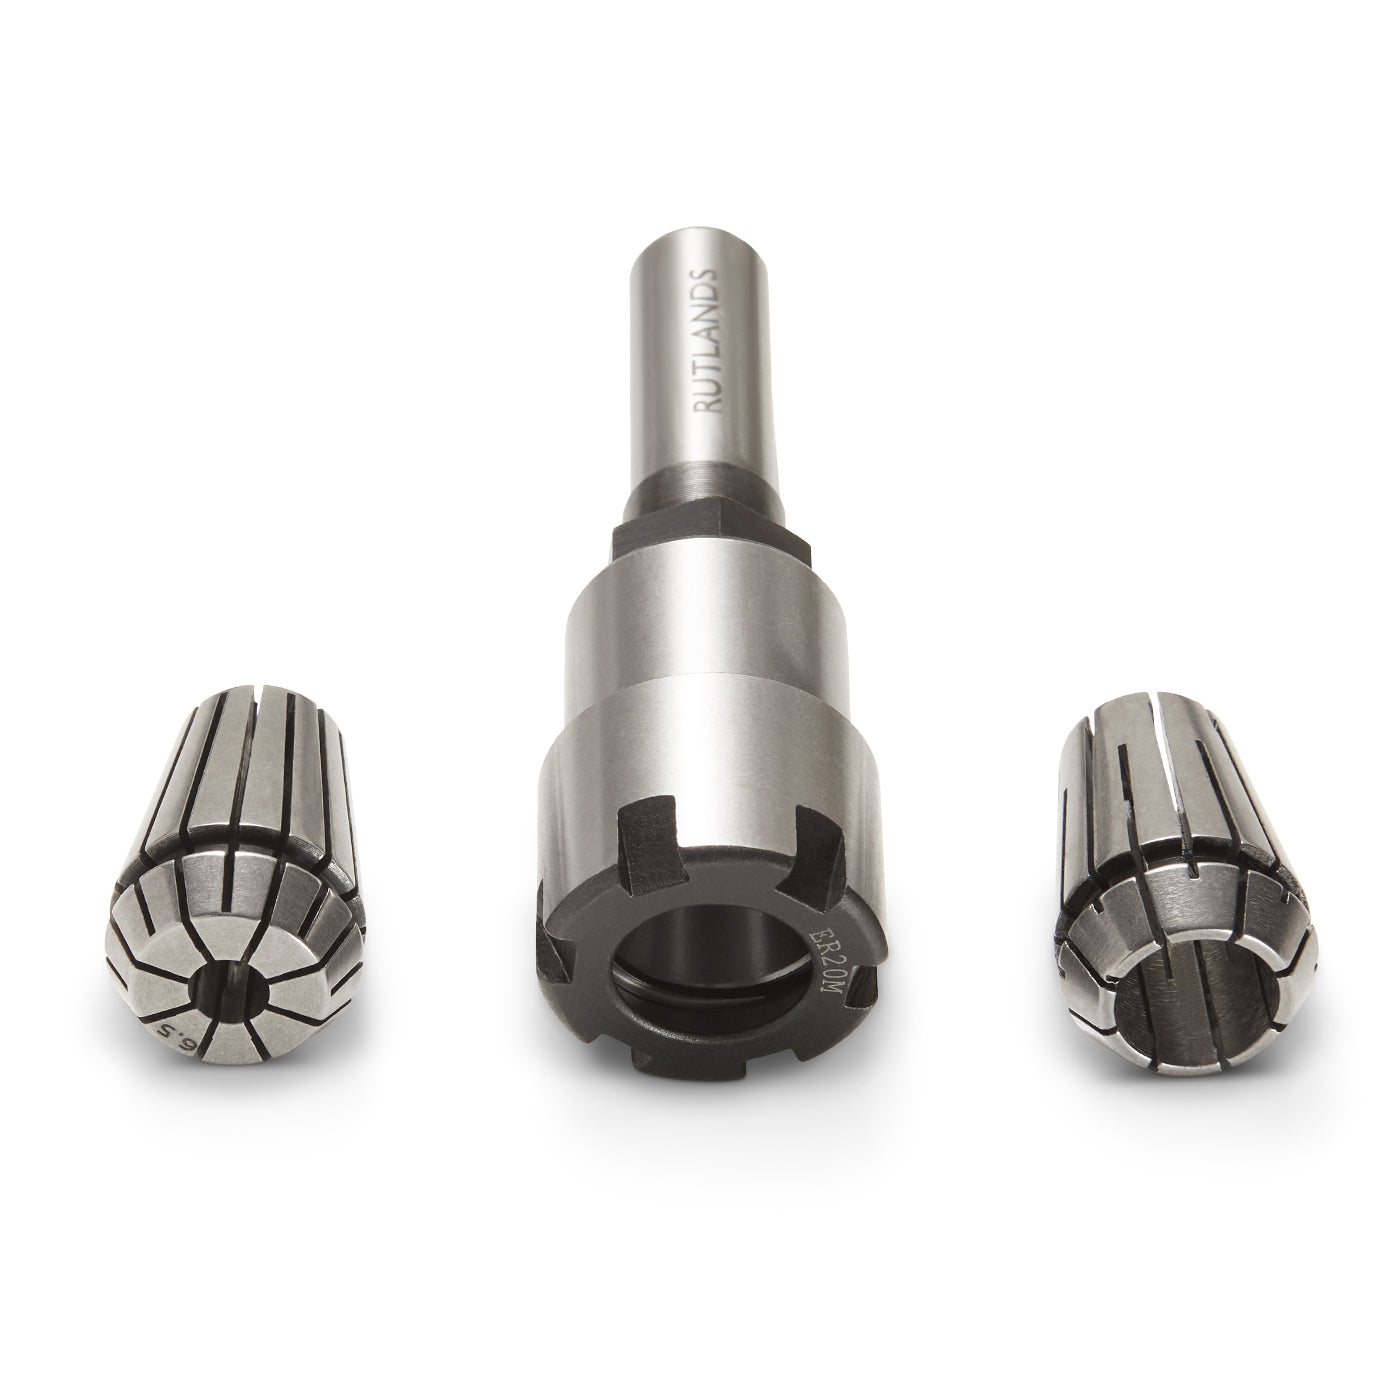 Collet Extension ER - 1/2" to  1/4" & 1/2"